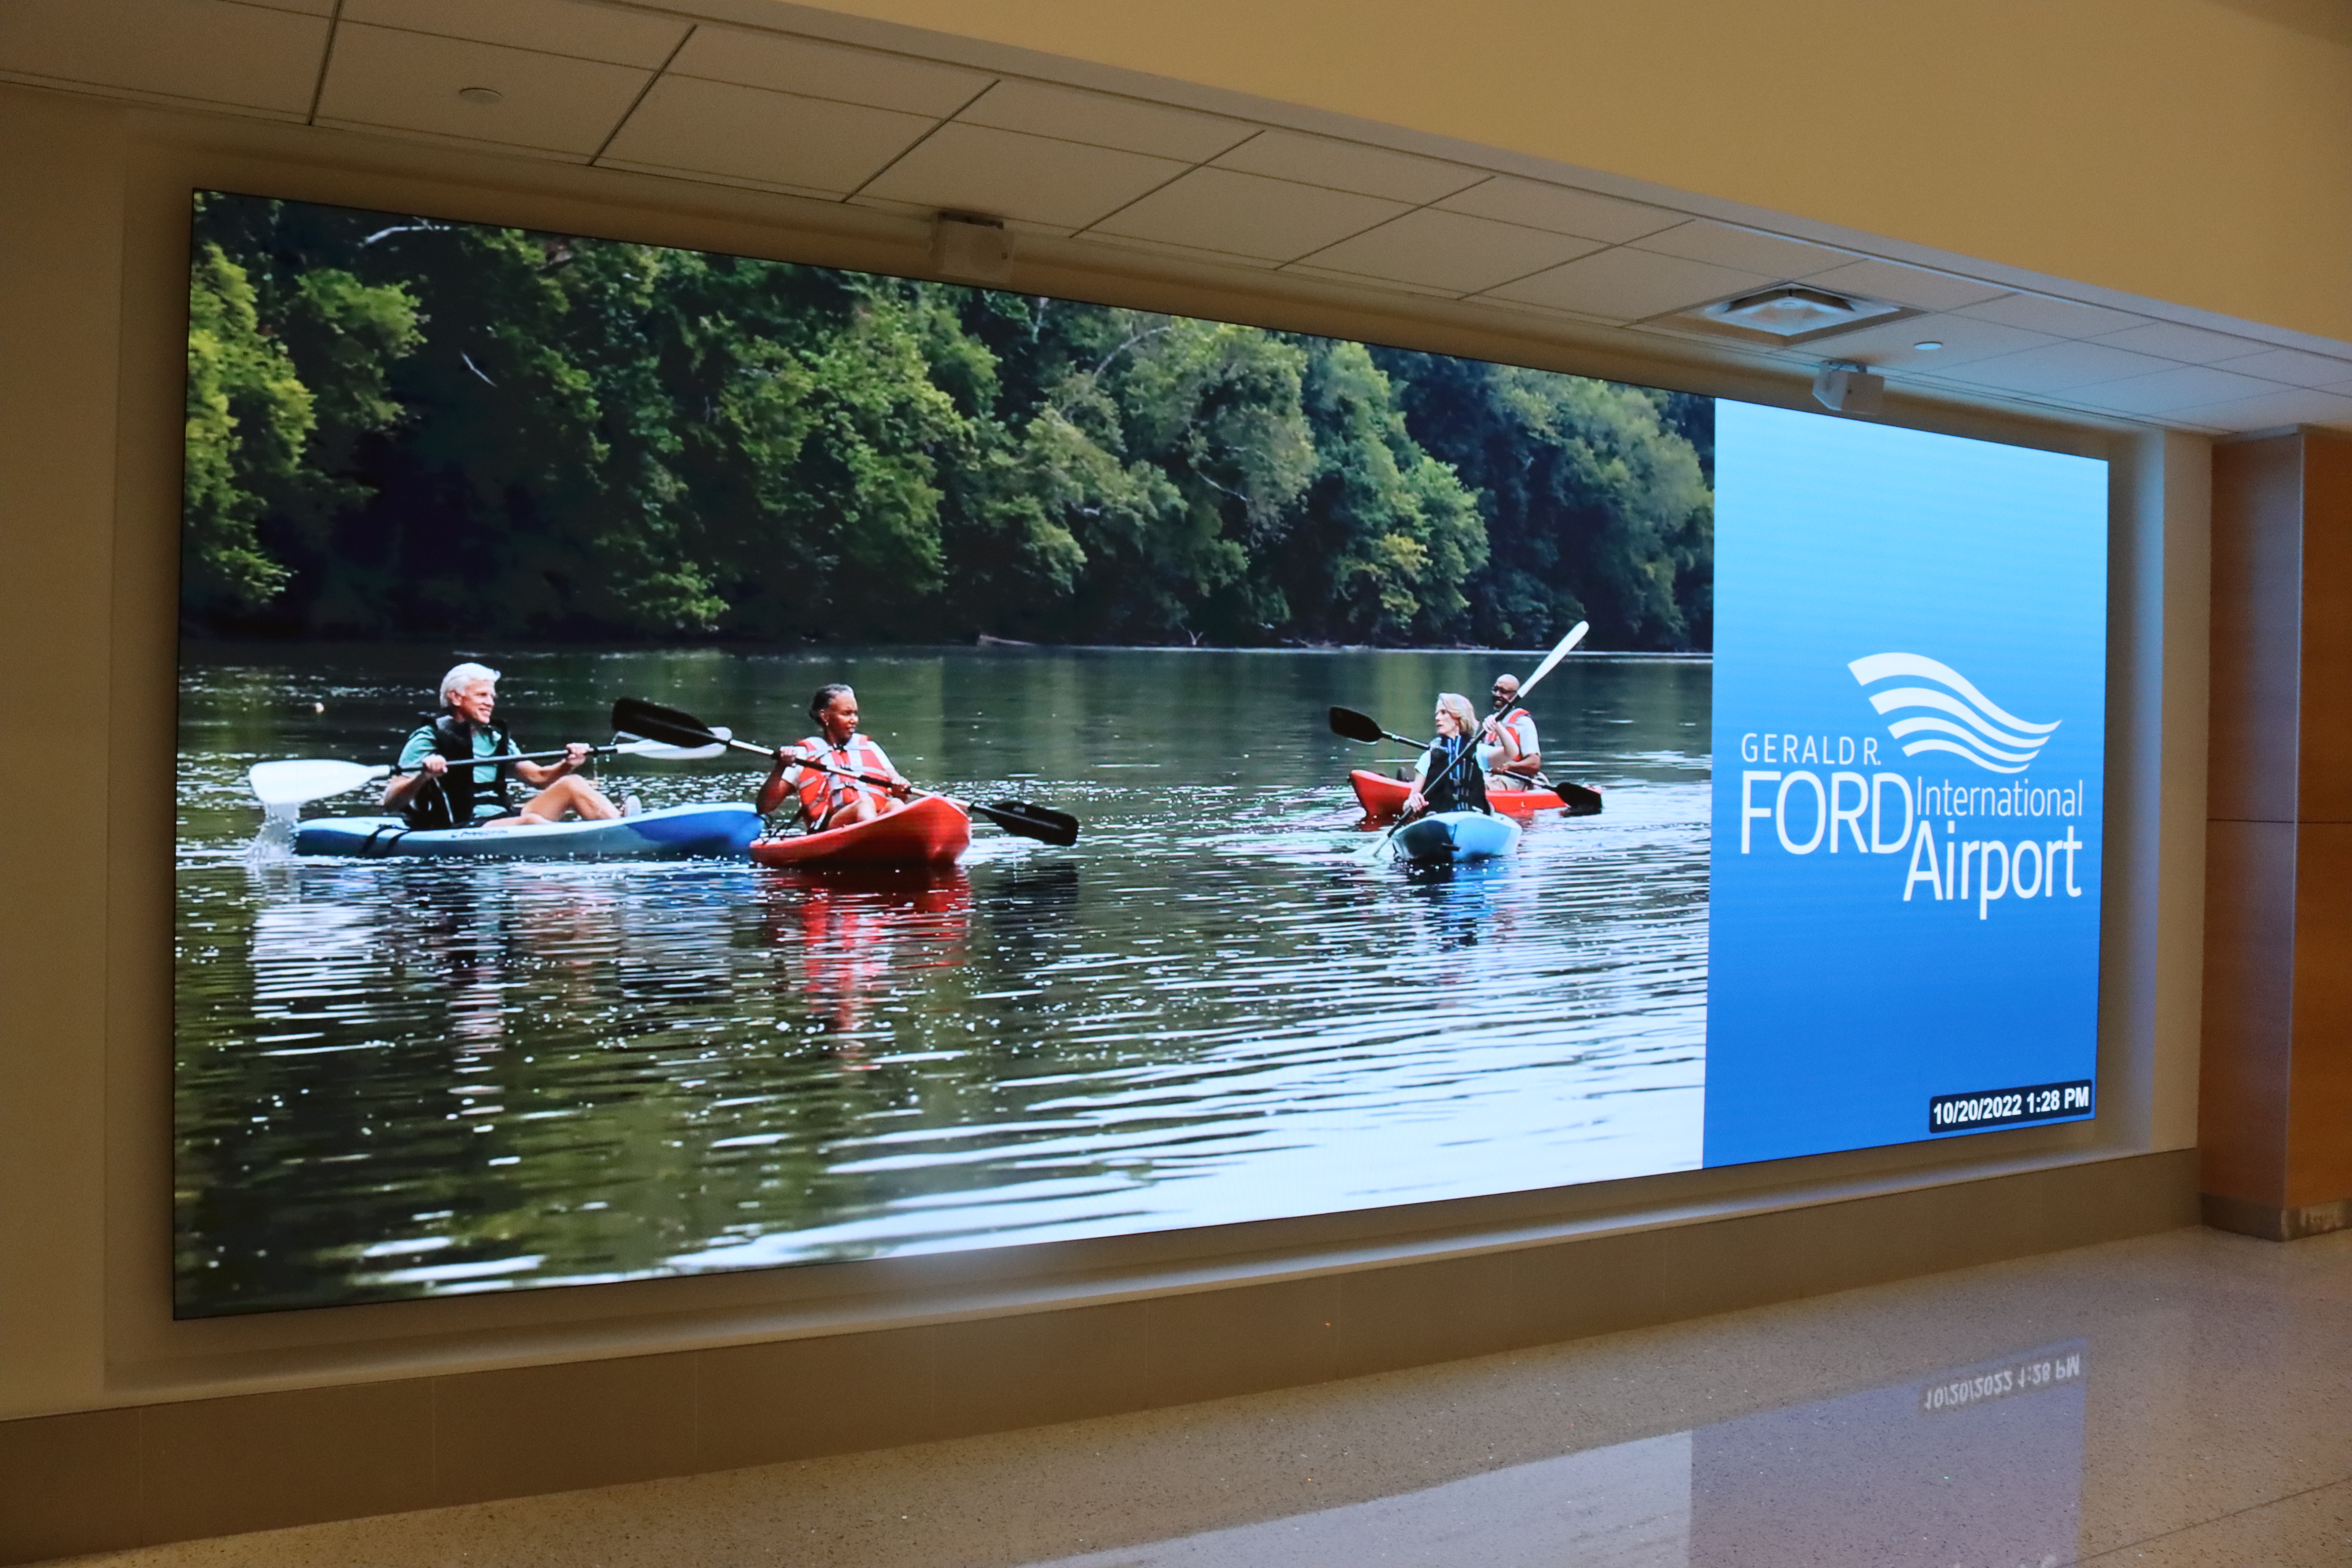 Freshwater Digital & Electro-Matic Provide 4K LED Videowall to Grand Rapids Airport